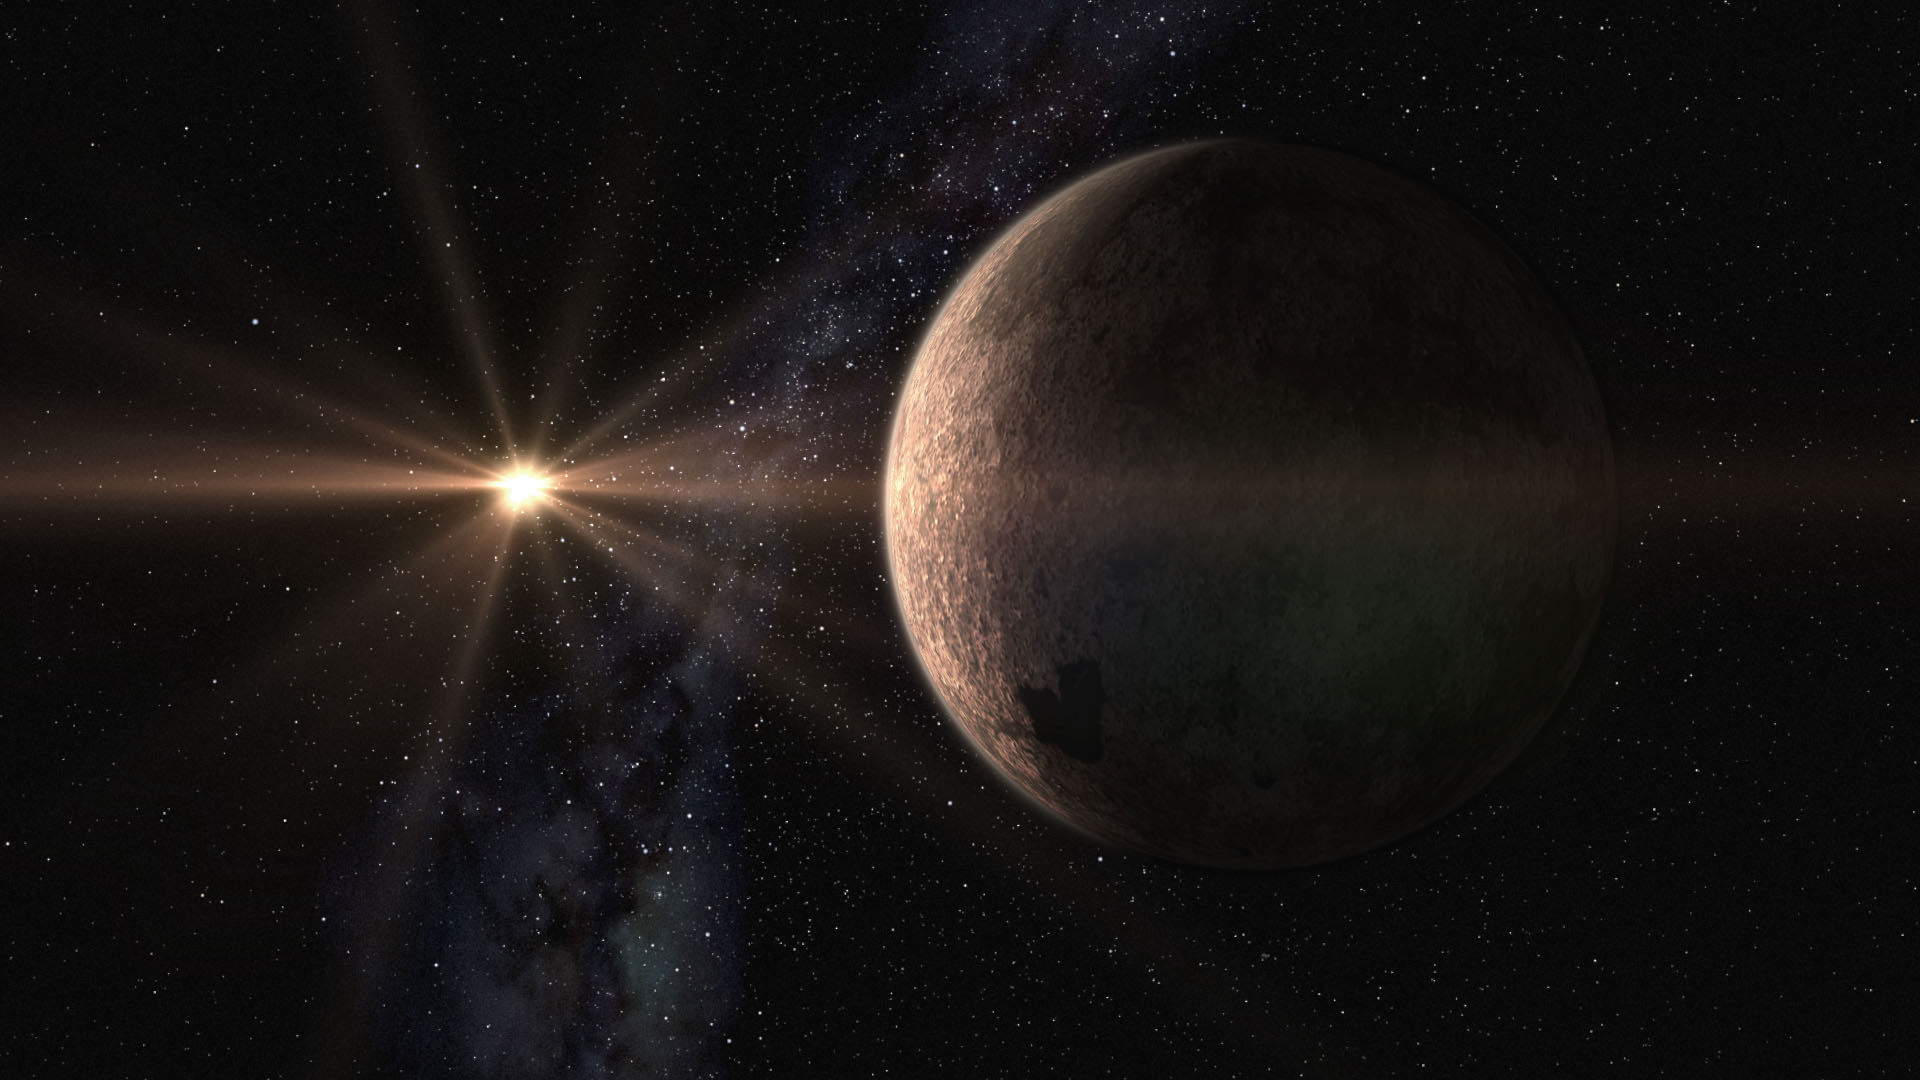 Superflares are less harmful to exoplanets than previously thought